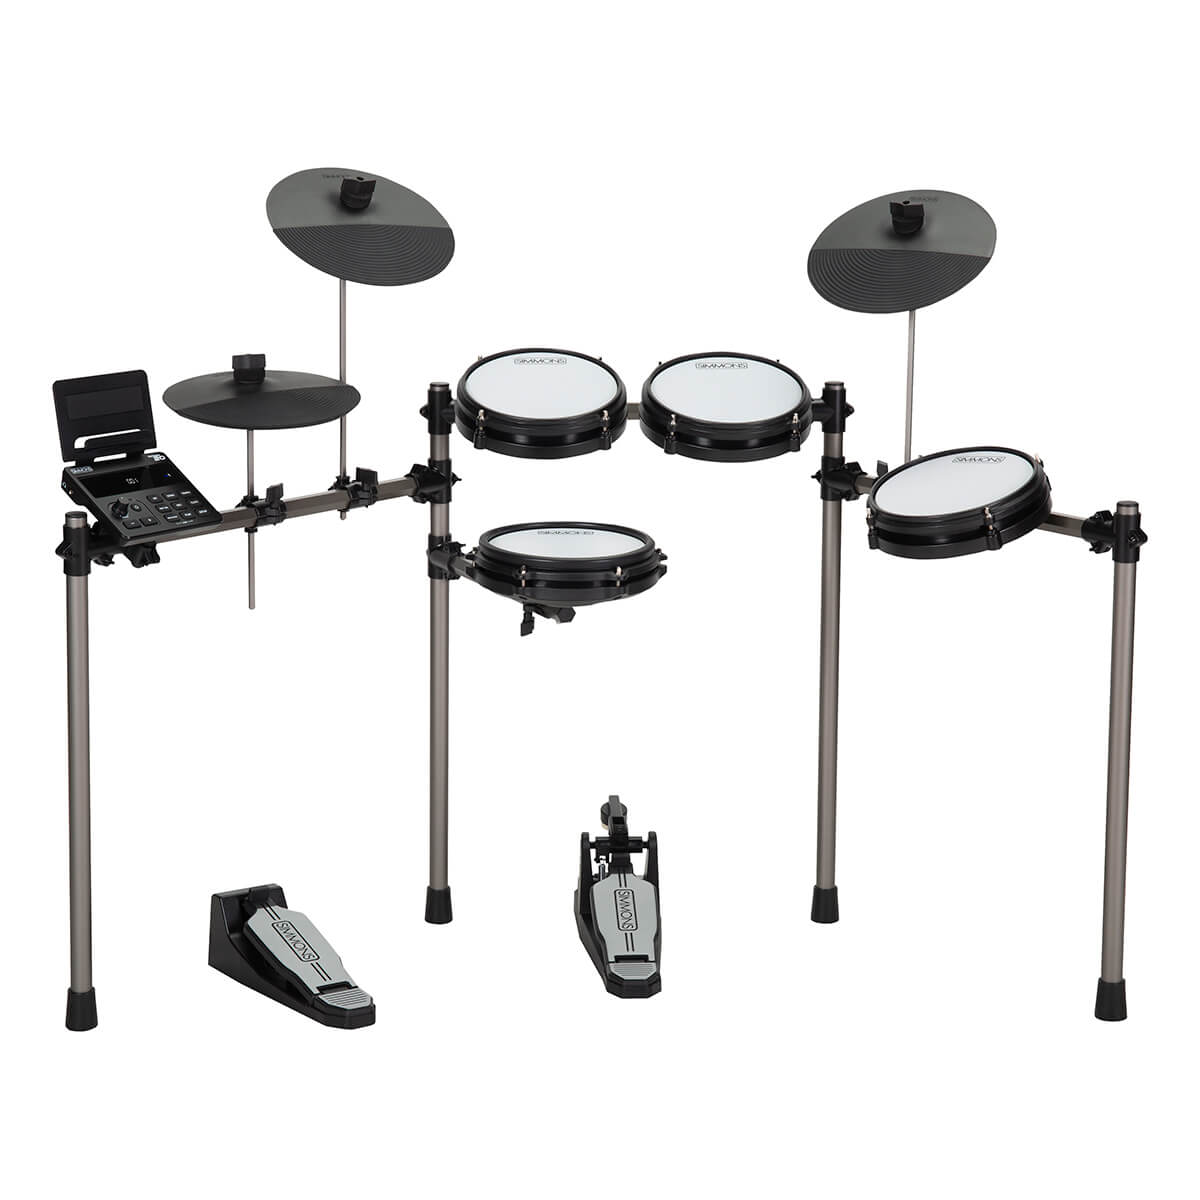 front view of Simmons Titan 20 electronic drum kit